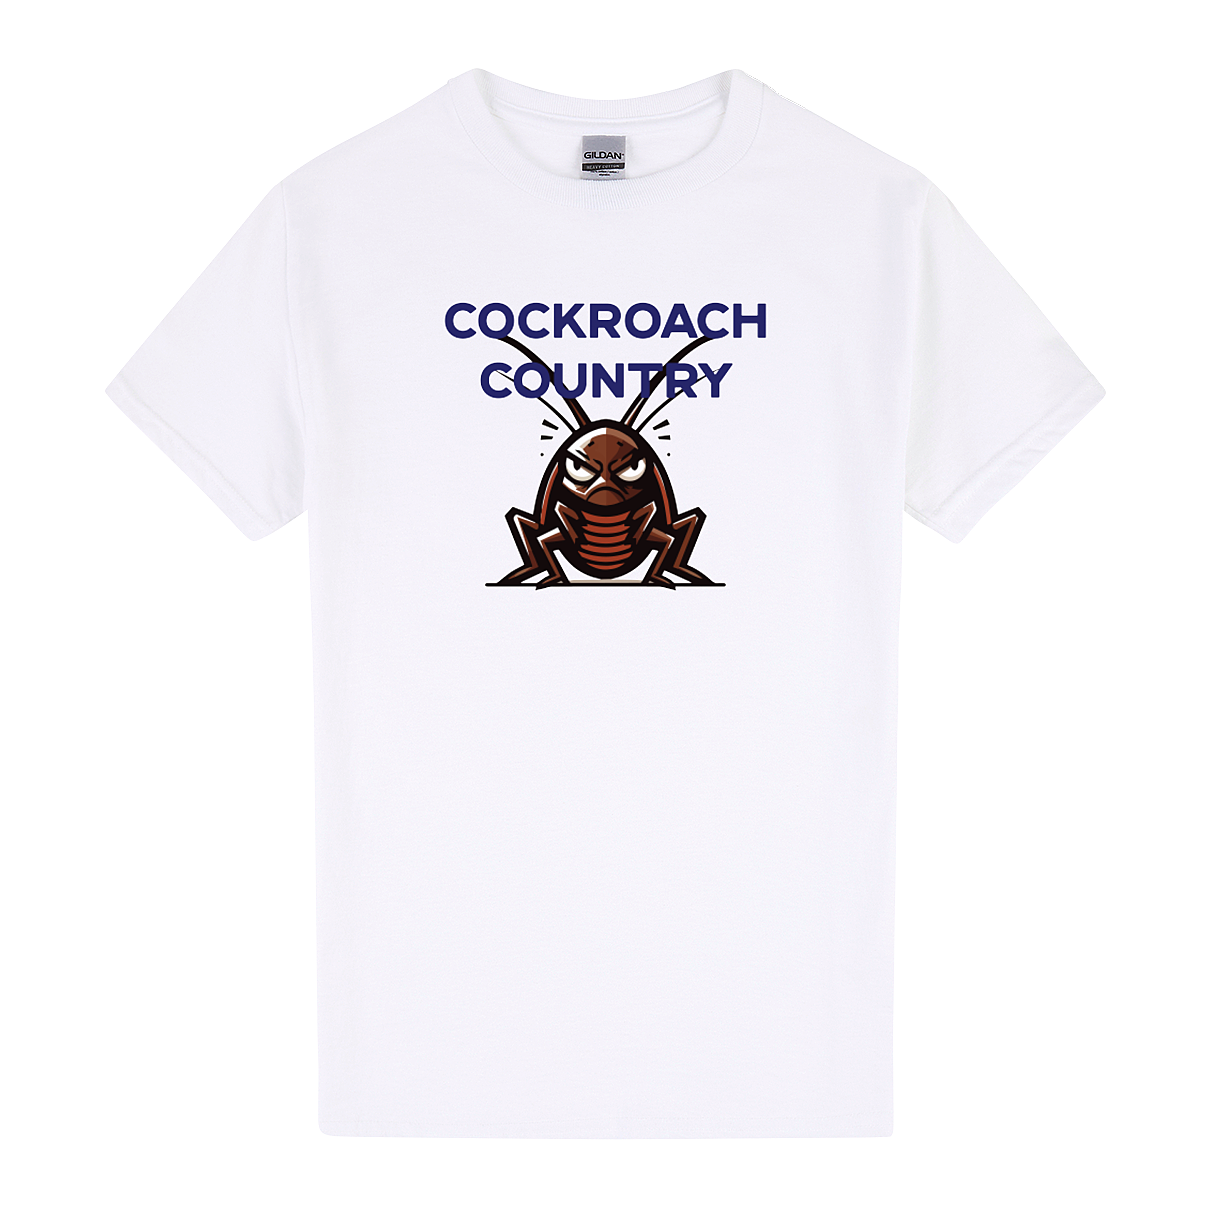 Cockroach Country Tee